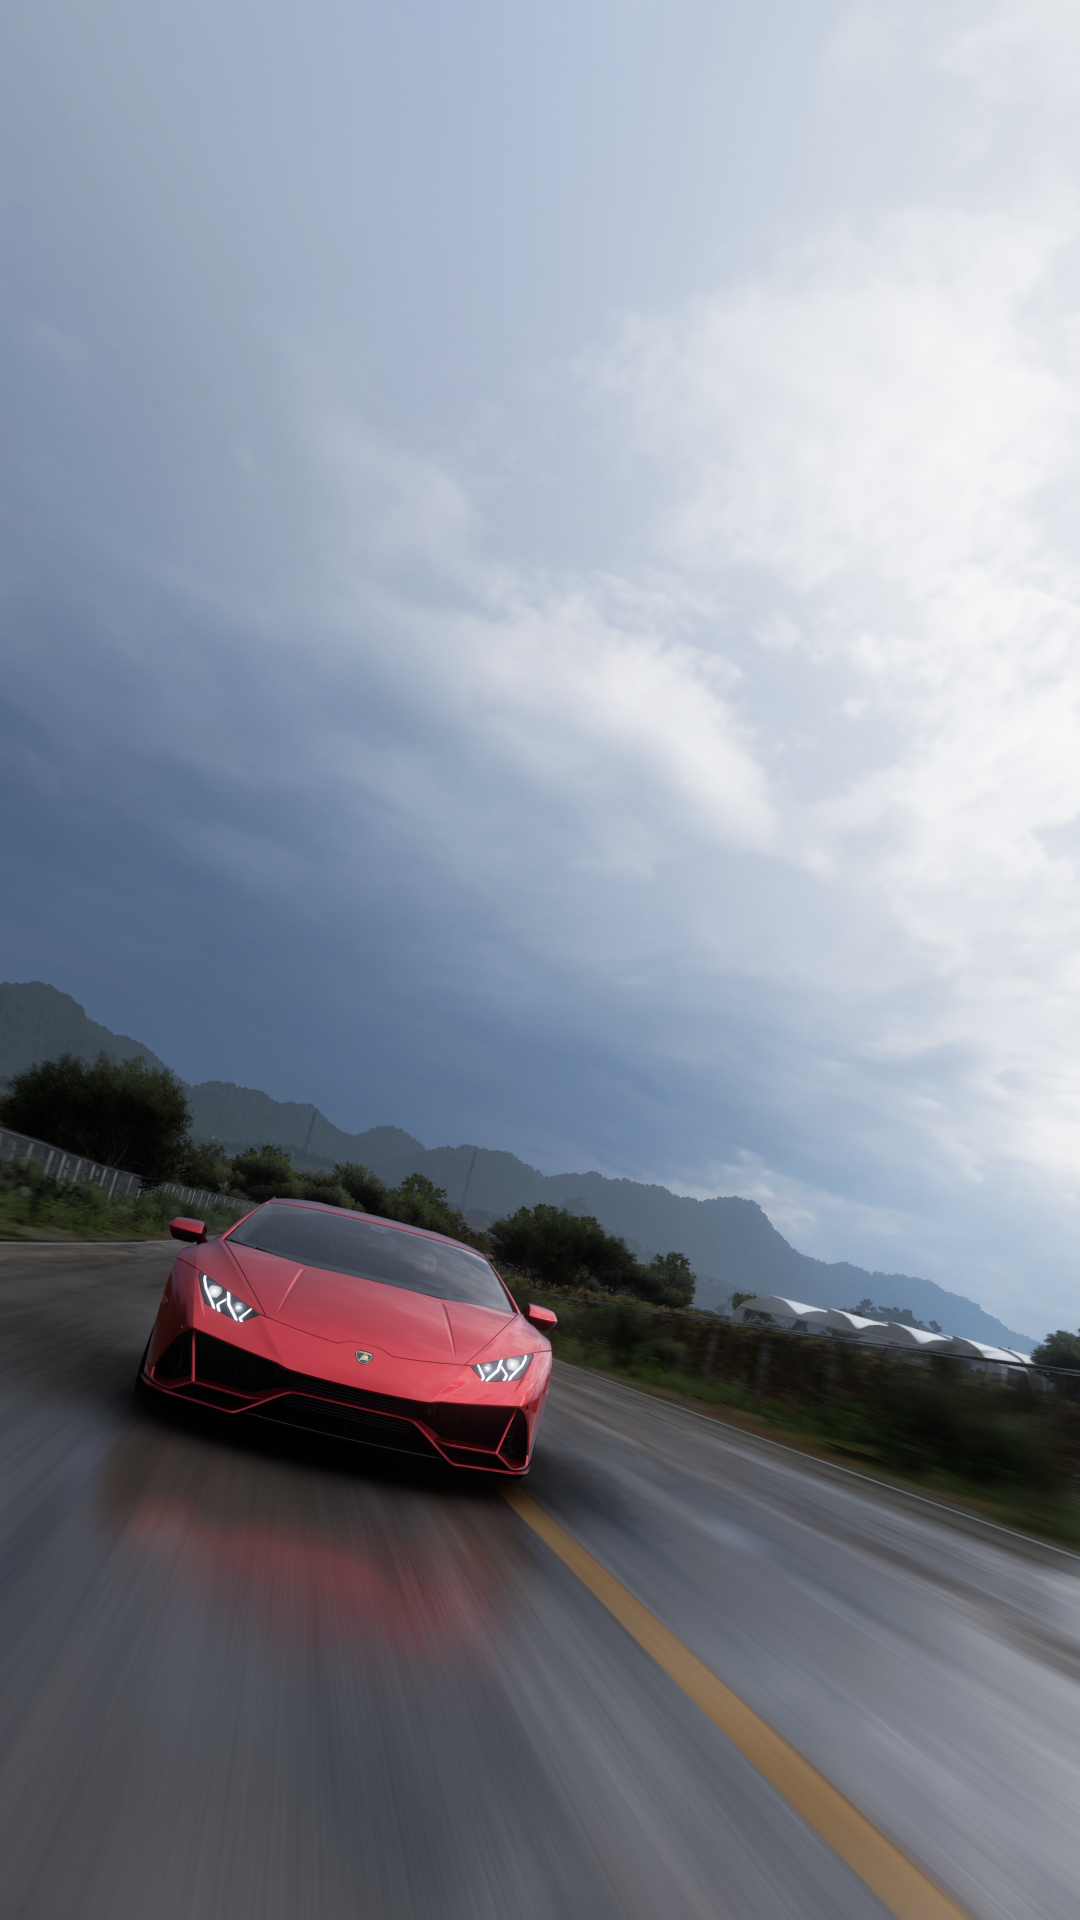 General 1080x1920 Forza screen shot PC gaming car Forza Horizon 5 vehicle frontal view headlights sky clouds road portrait display trees video games CGI angle view